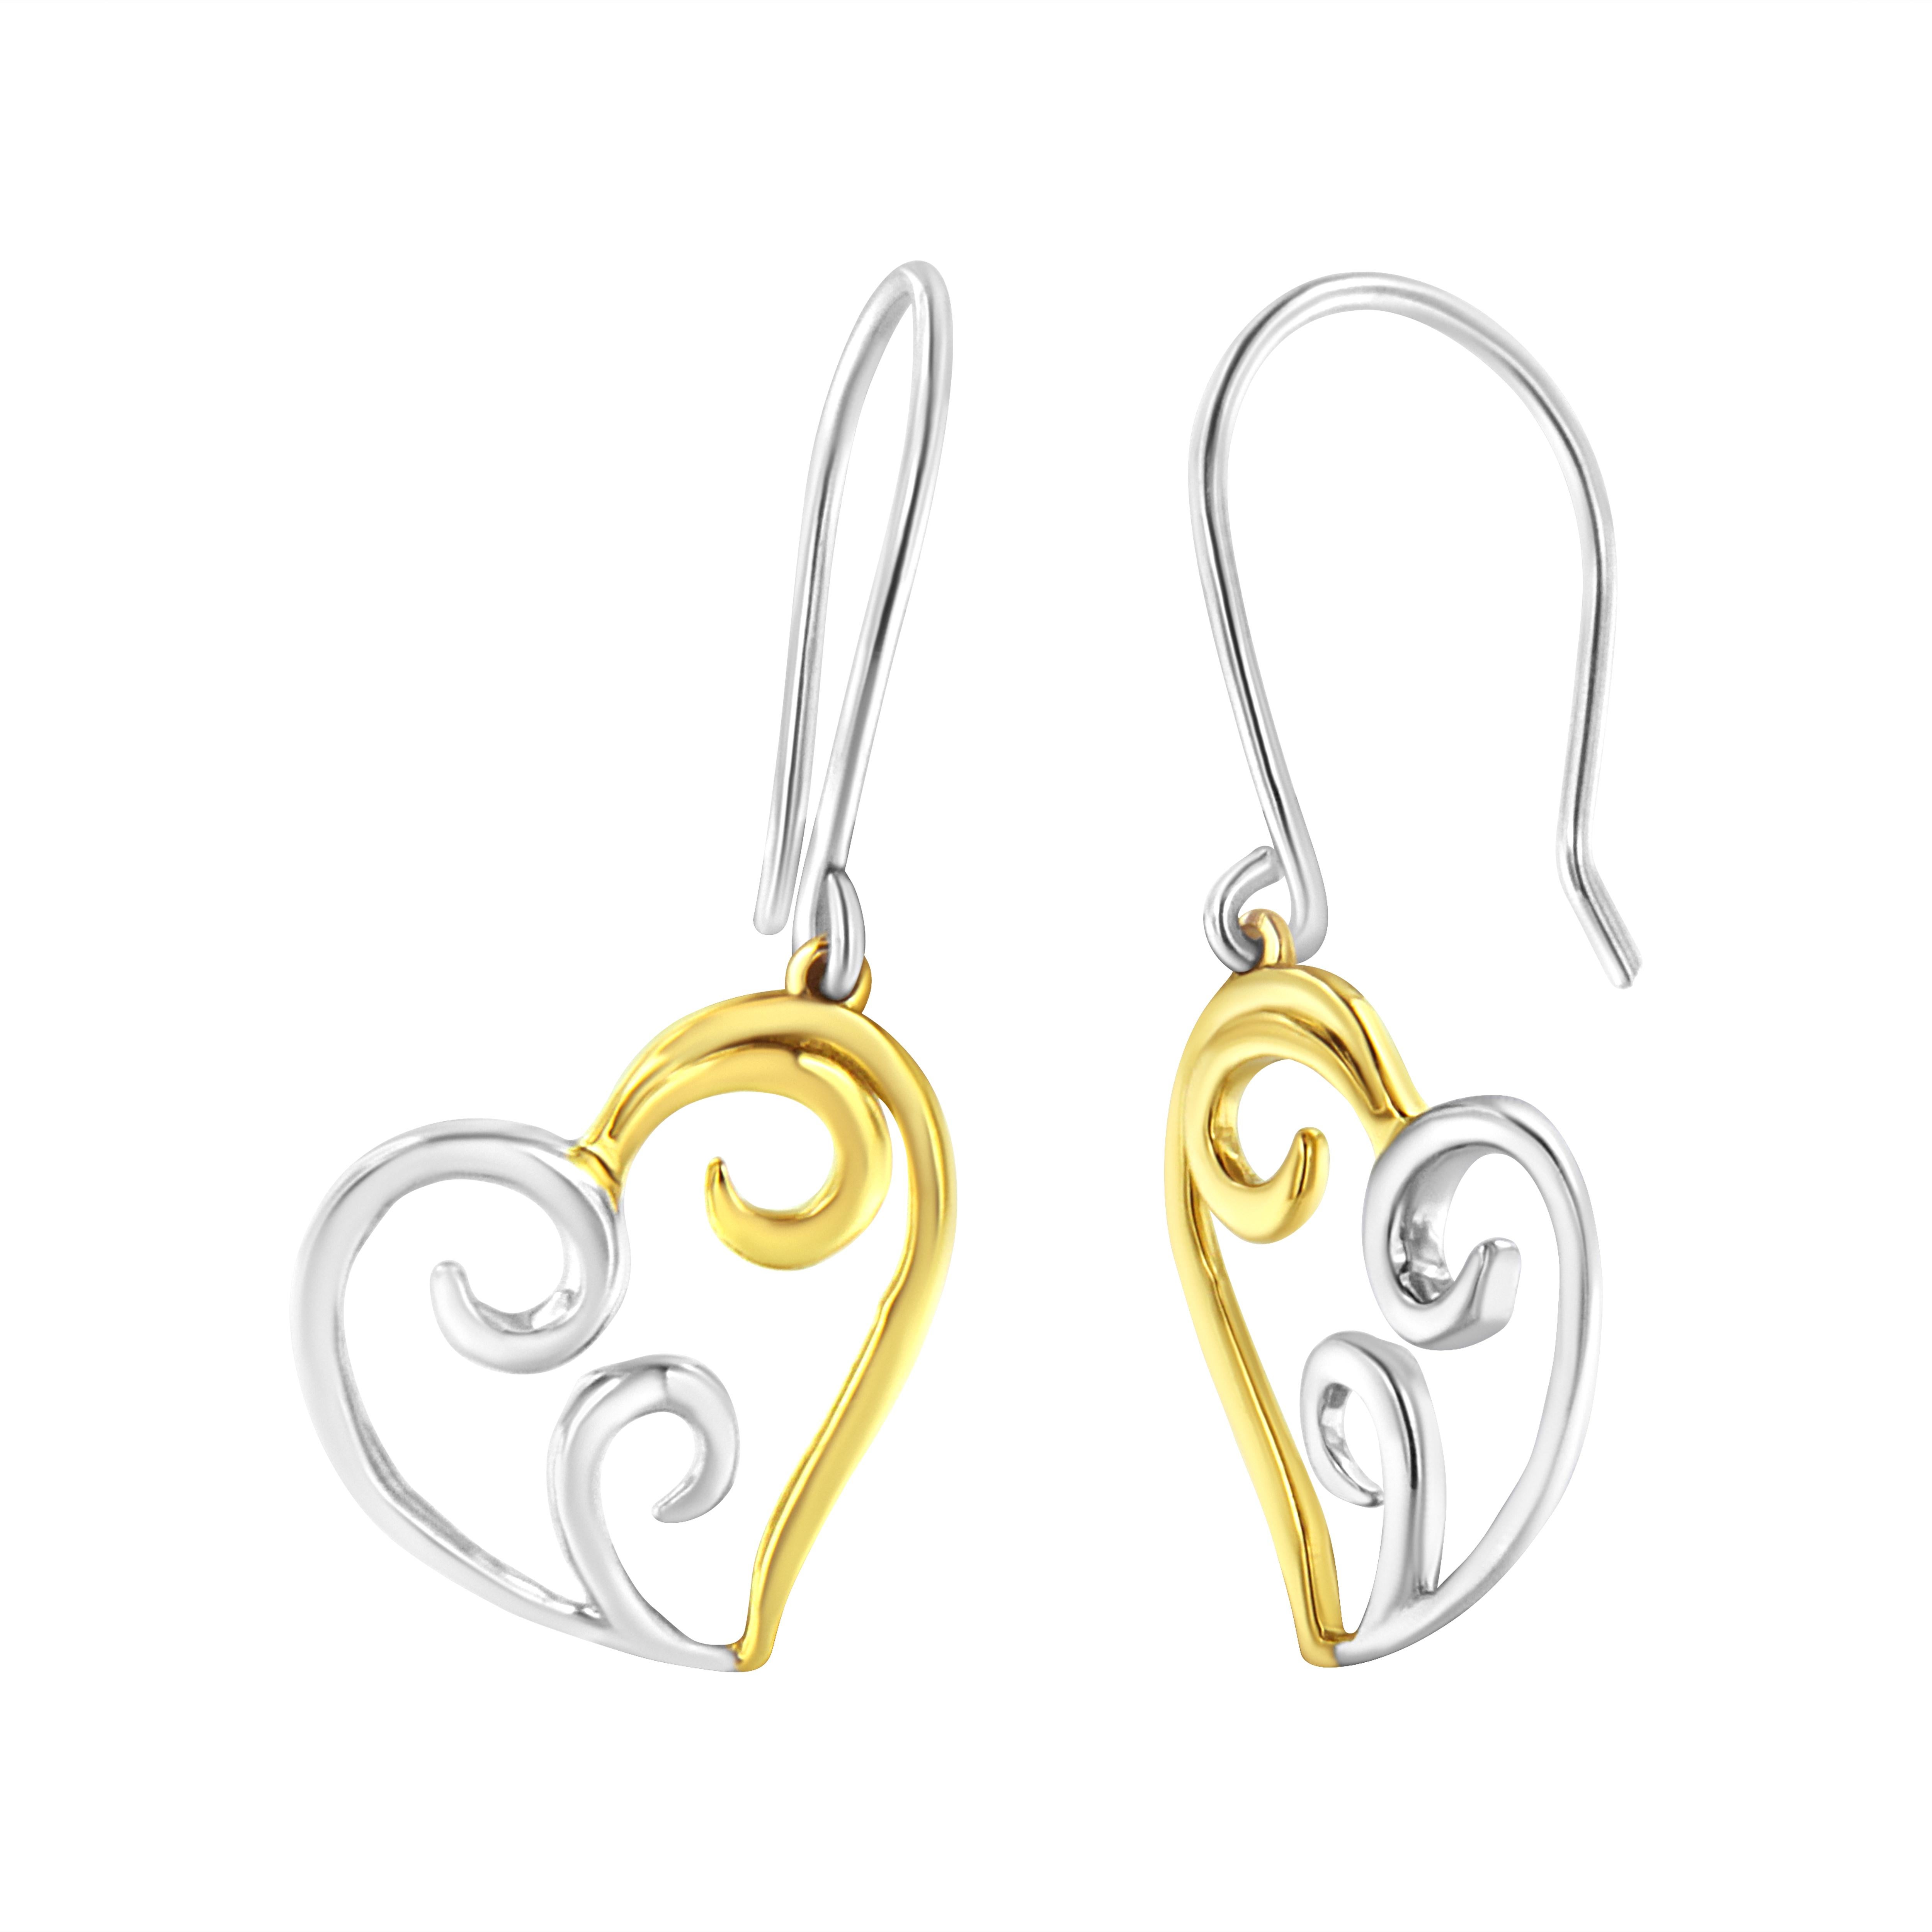 These two-toned earrings are certain to make your look romantic and elegant. Chisel to excellence, created in the shape of a heart with swirl accents, these earrings are crafted of 14 karats lustrous white and yellow gold. Simple yet graceful,